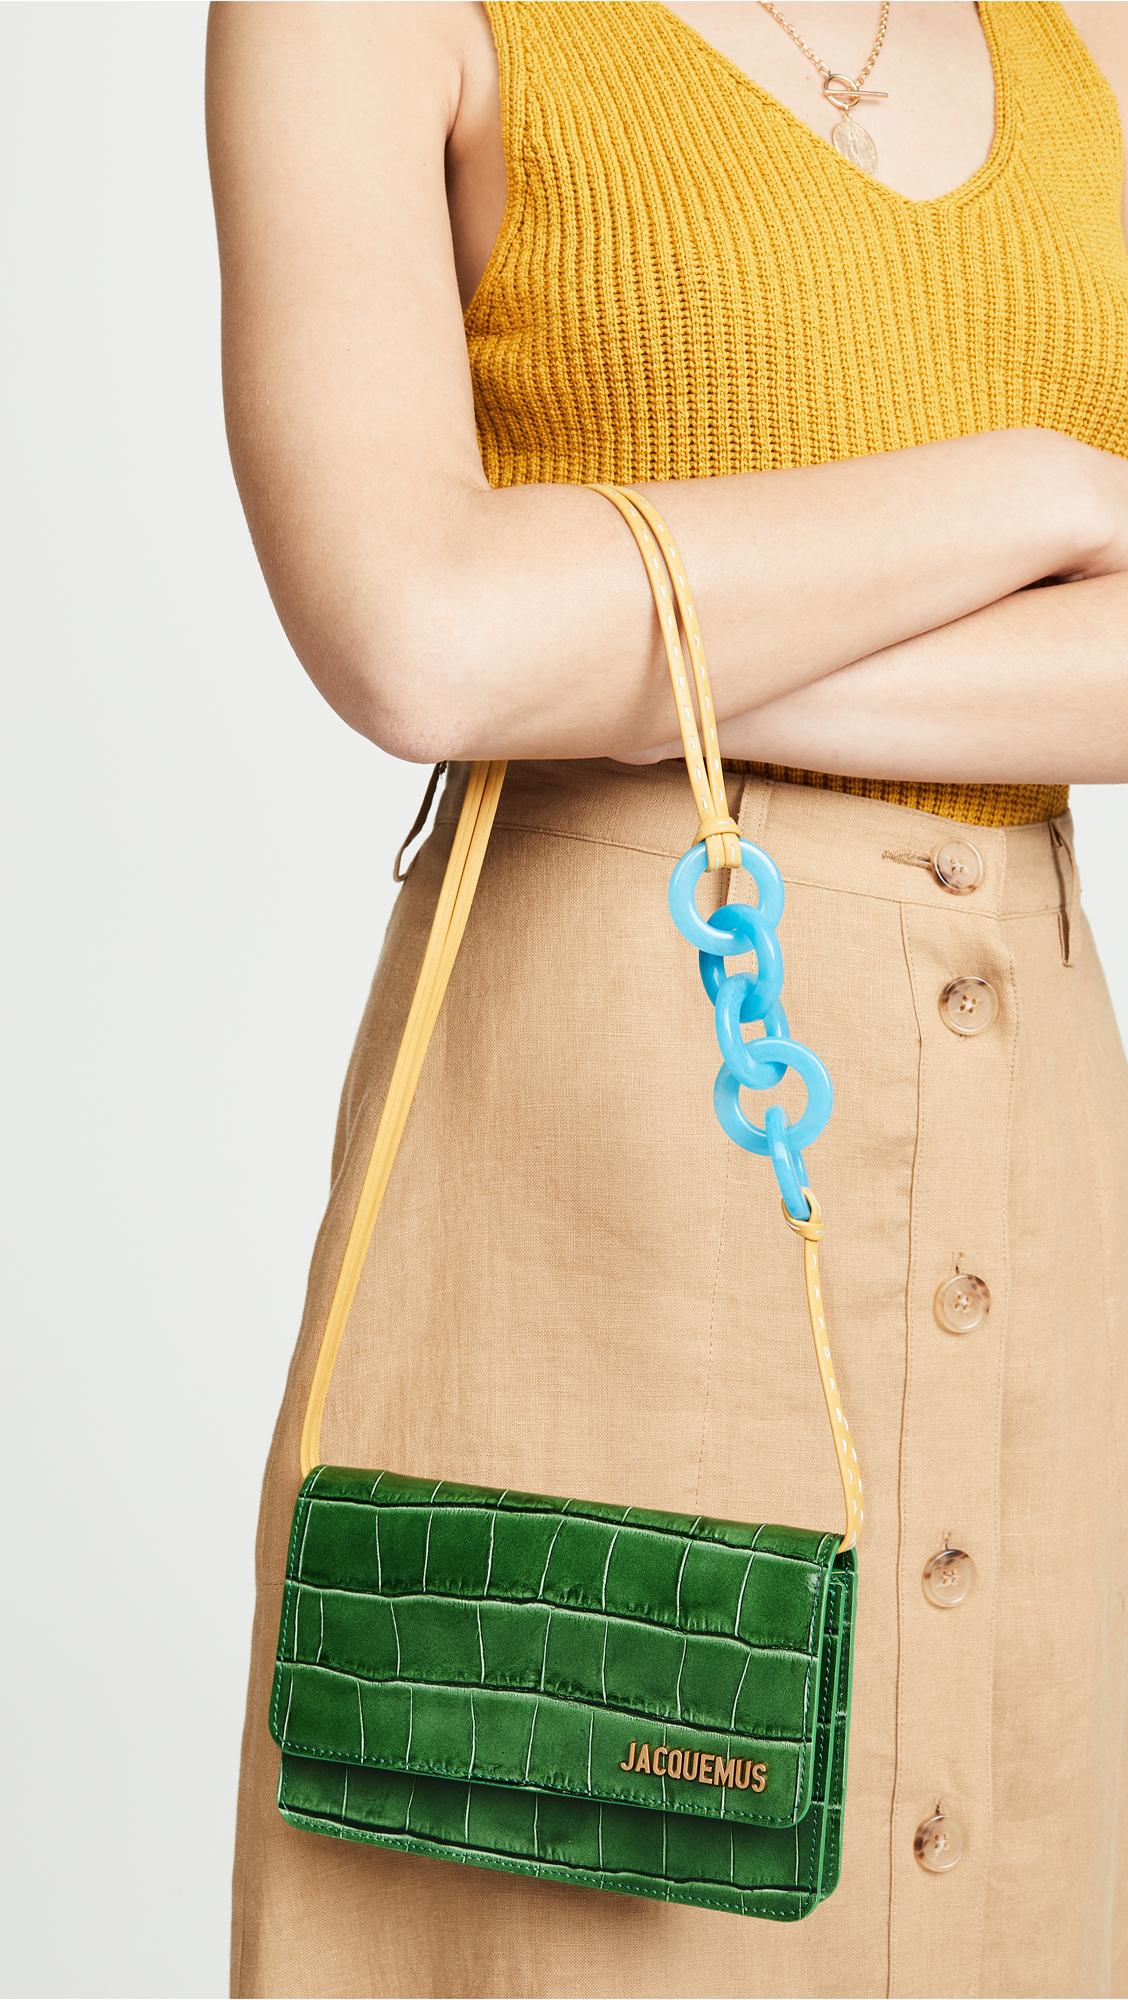 Jacquemus Le Sac Riviera Bag in Green | Lyst